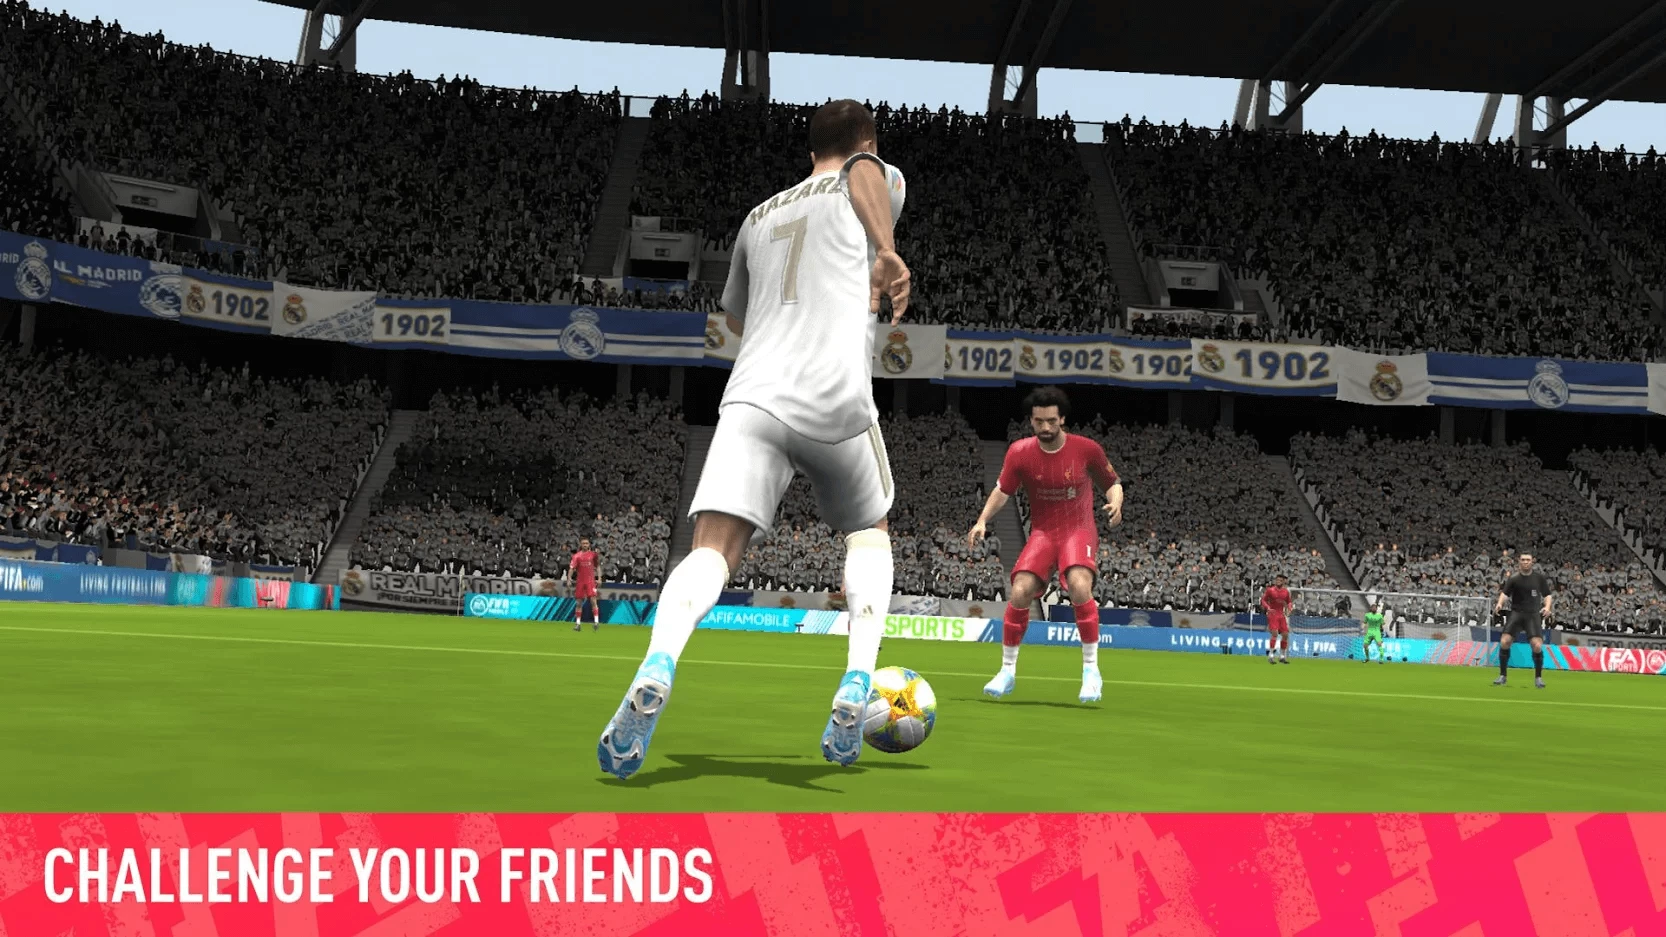 FIFA Soccer on now gg lit gameplay #nowgg #fifasoccer 